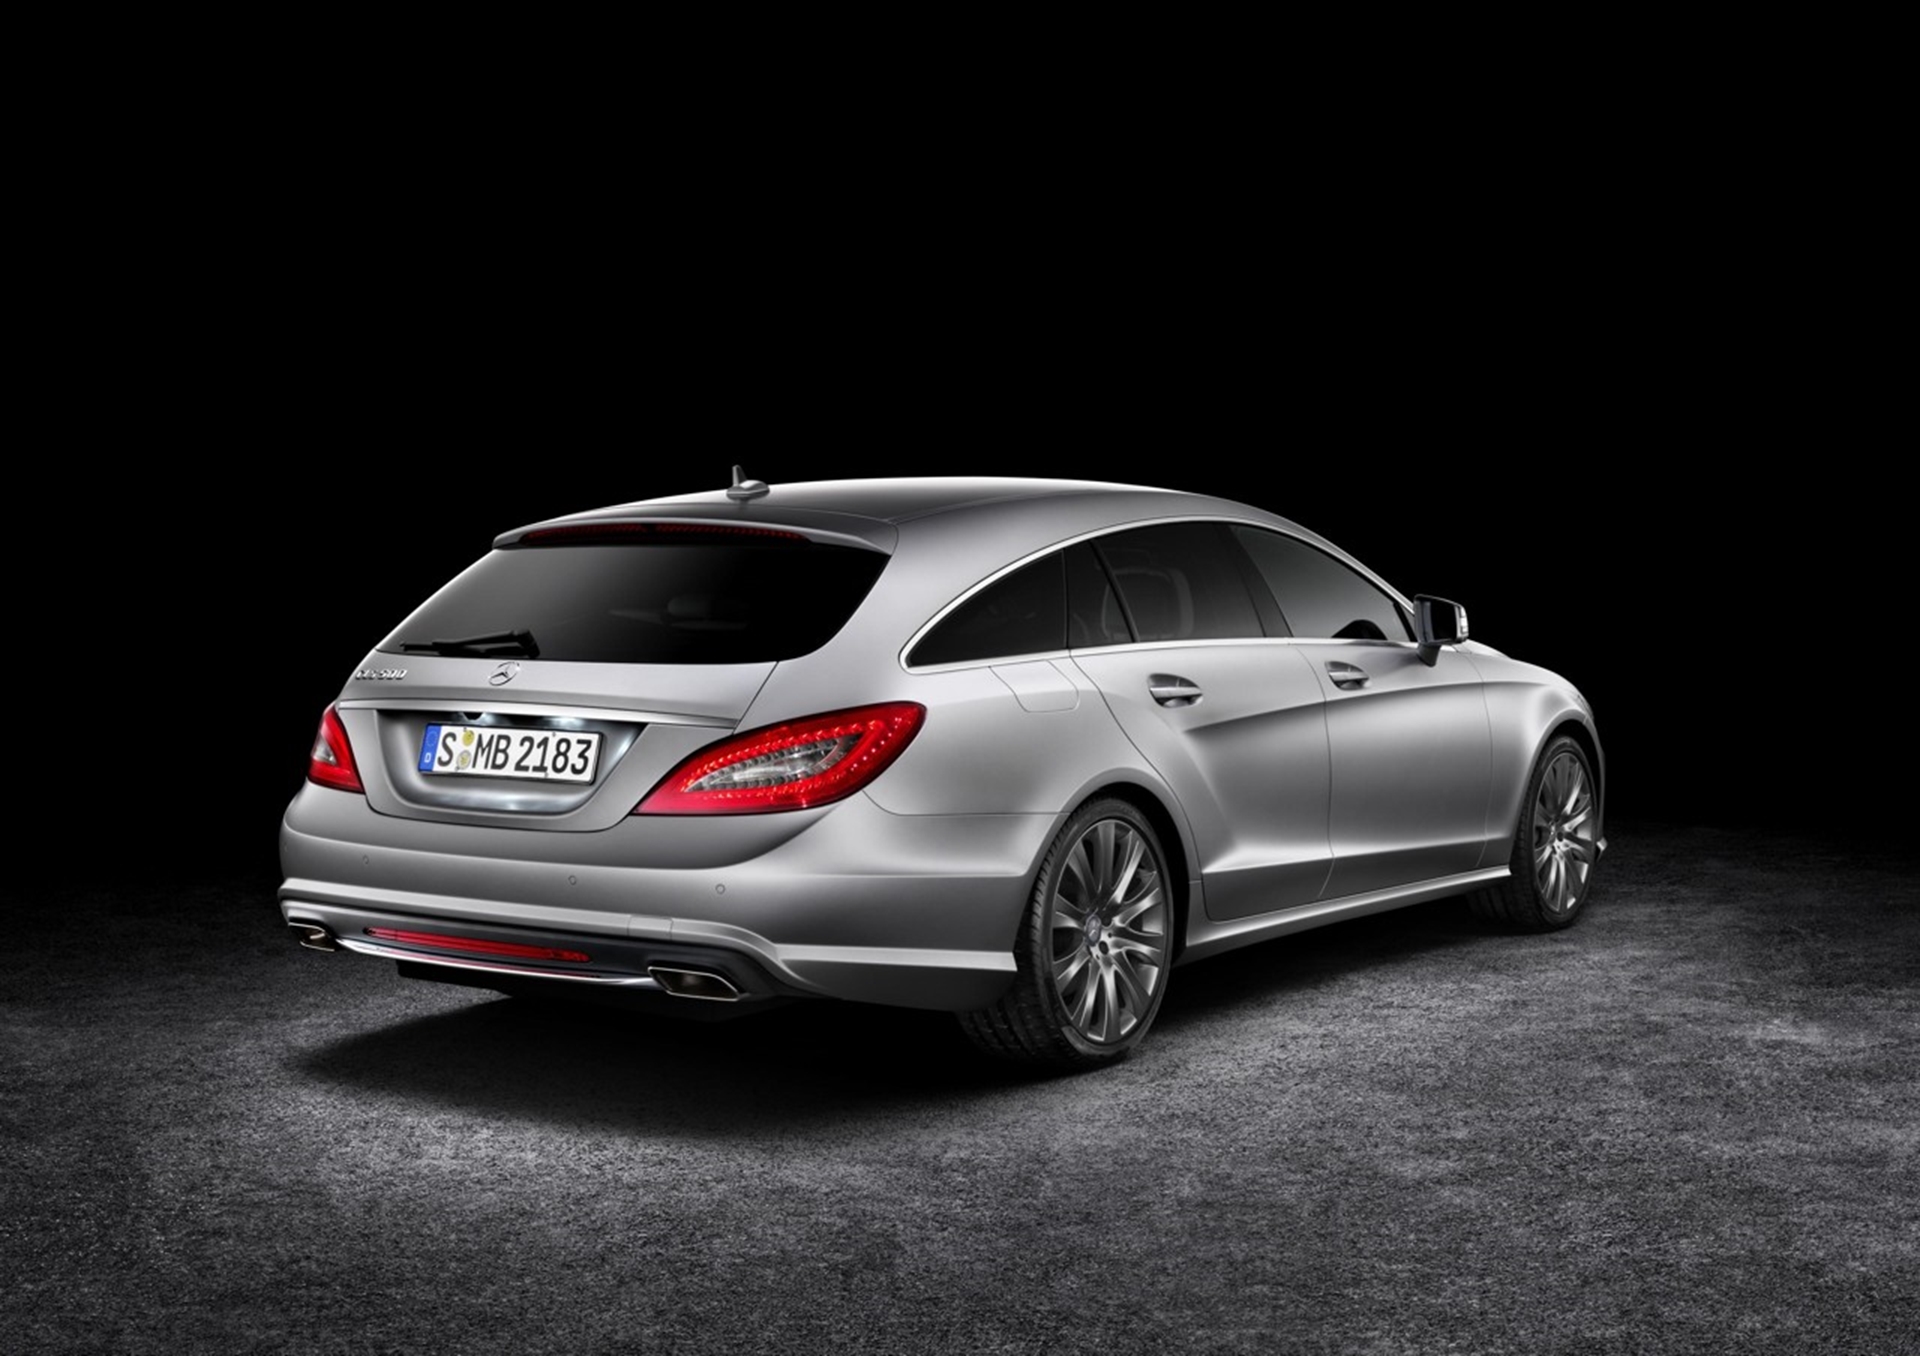 MERCEDES-BENZ CLS SHOOTING BRAKE – INDEPENDENCE AT ITS MOST BEAUTIFUL